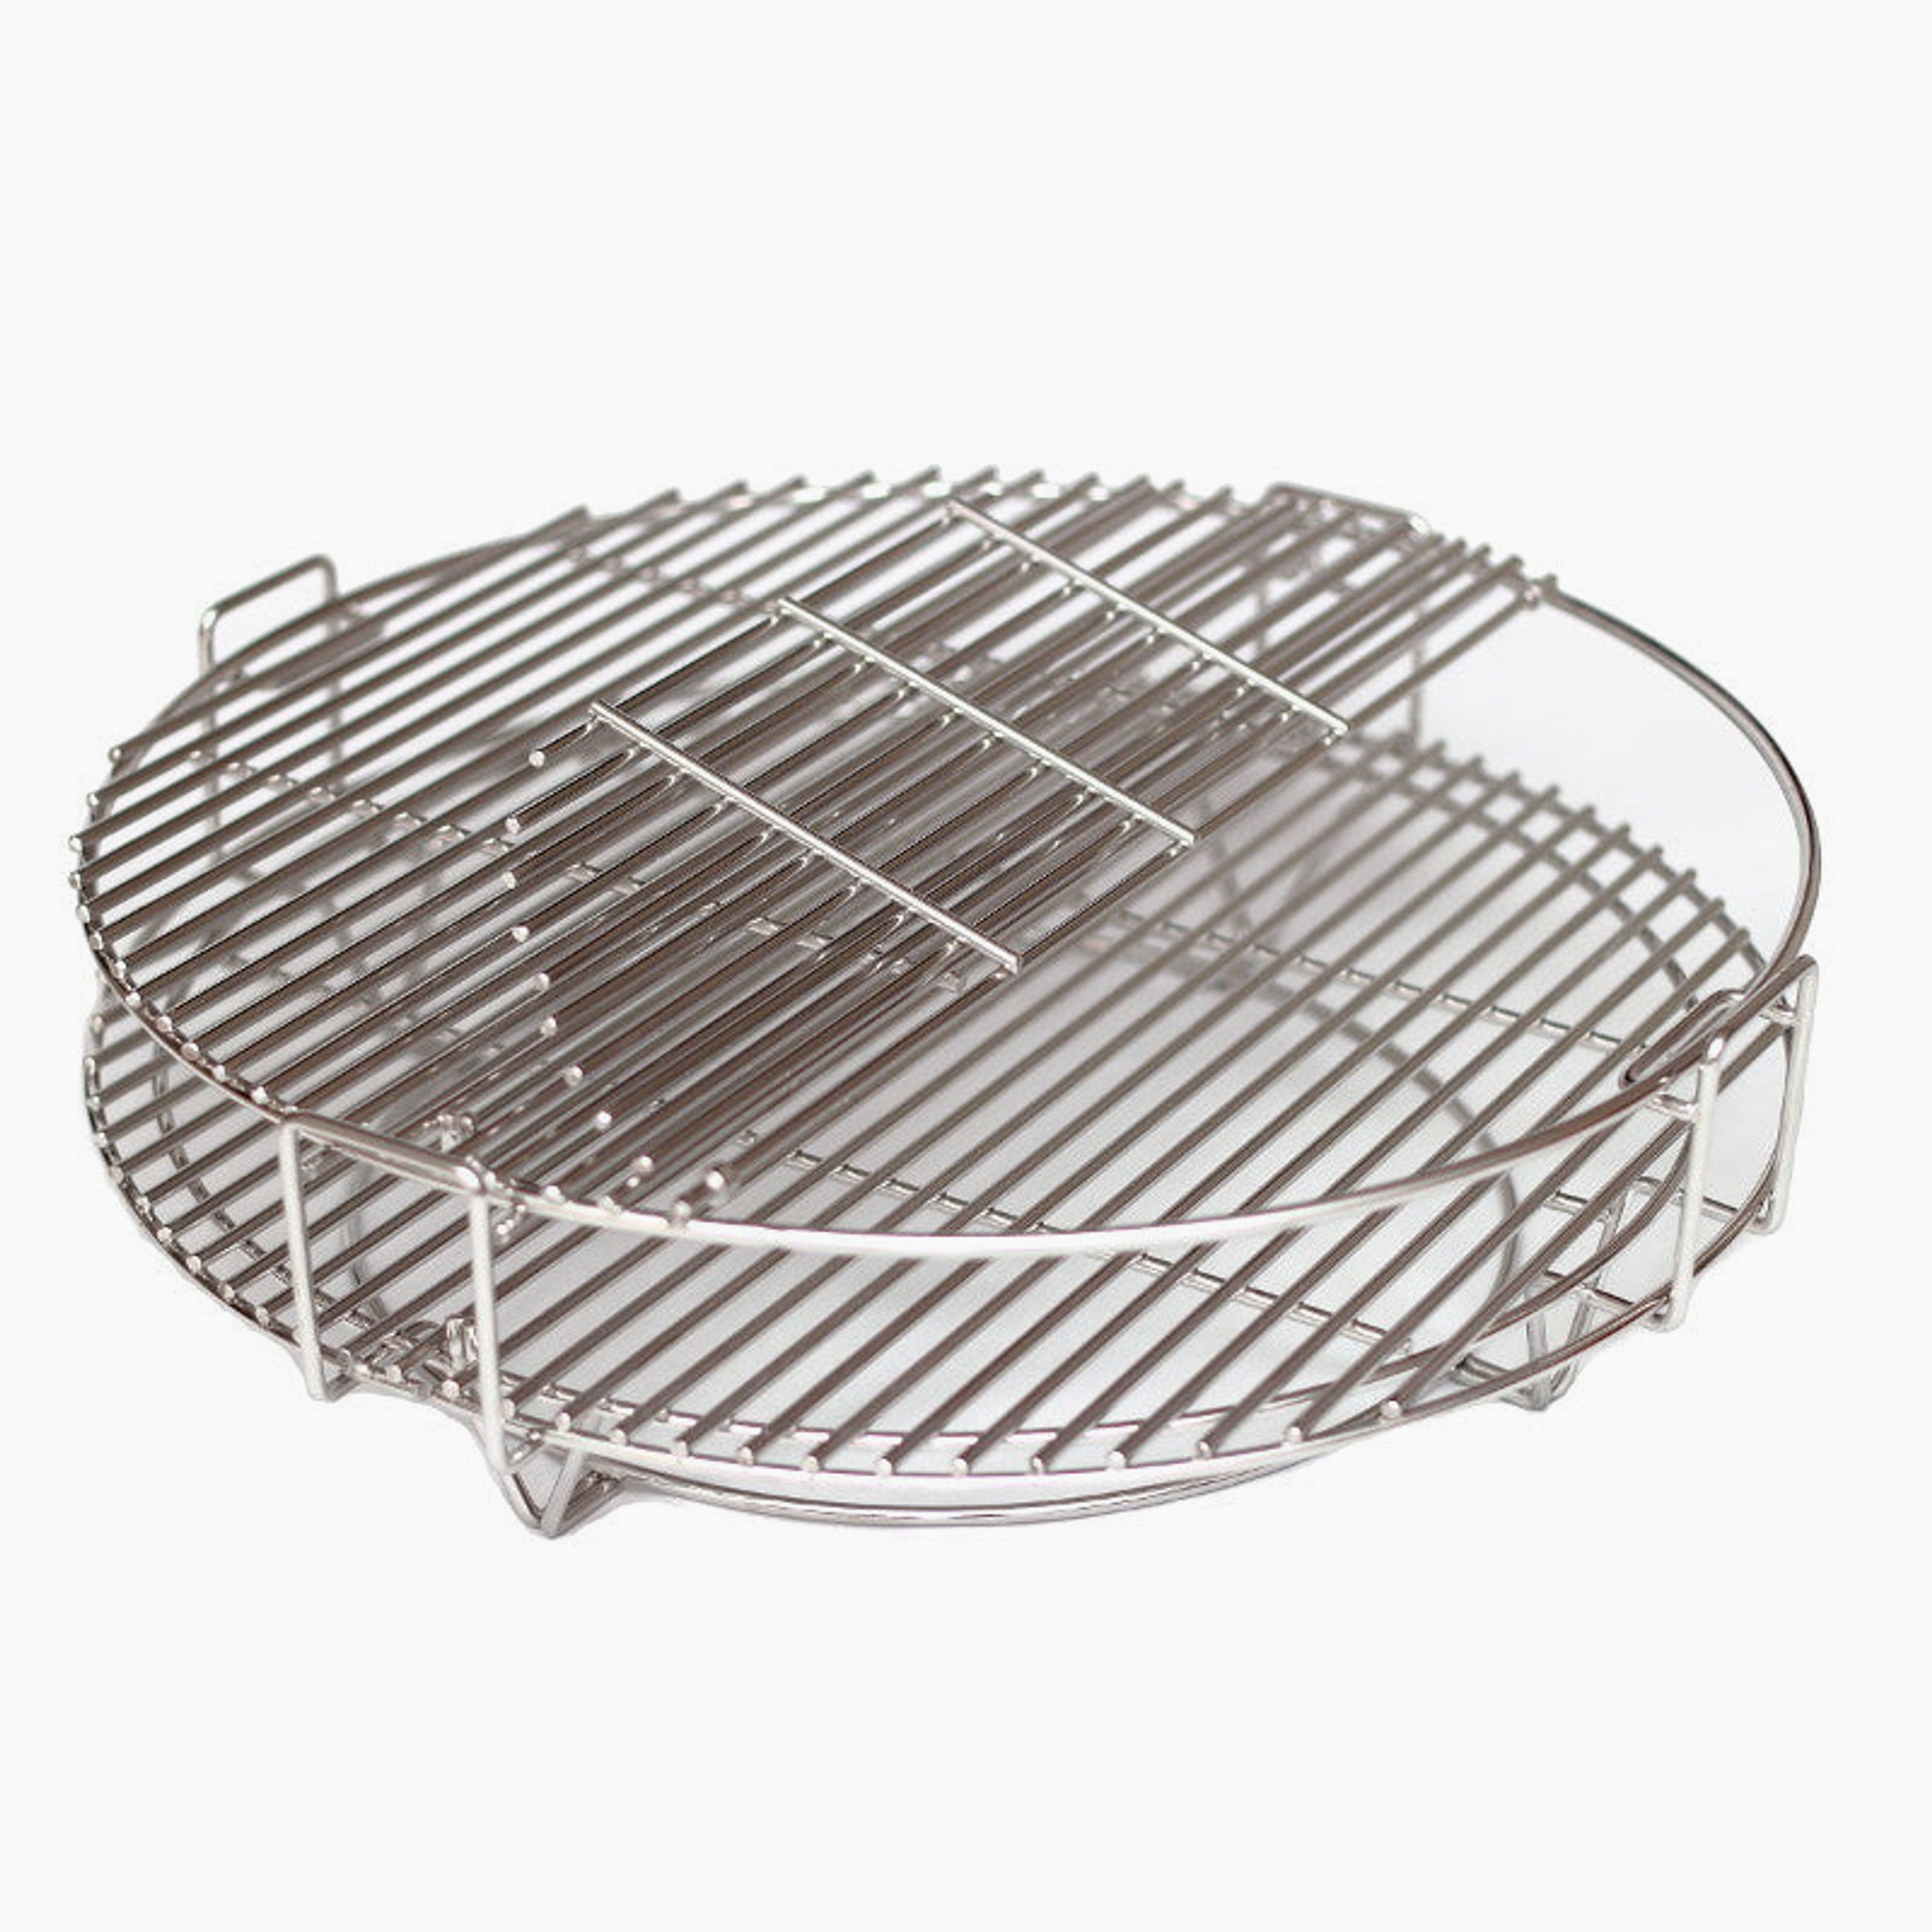 Stainless Steel Grill Grate, 18 Inch